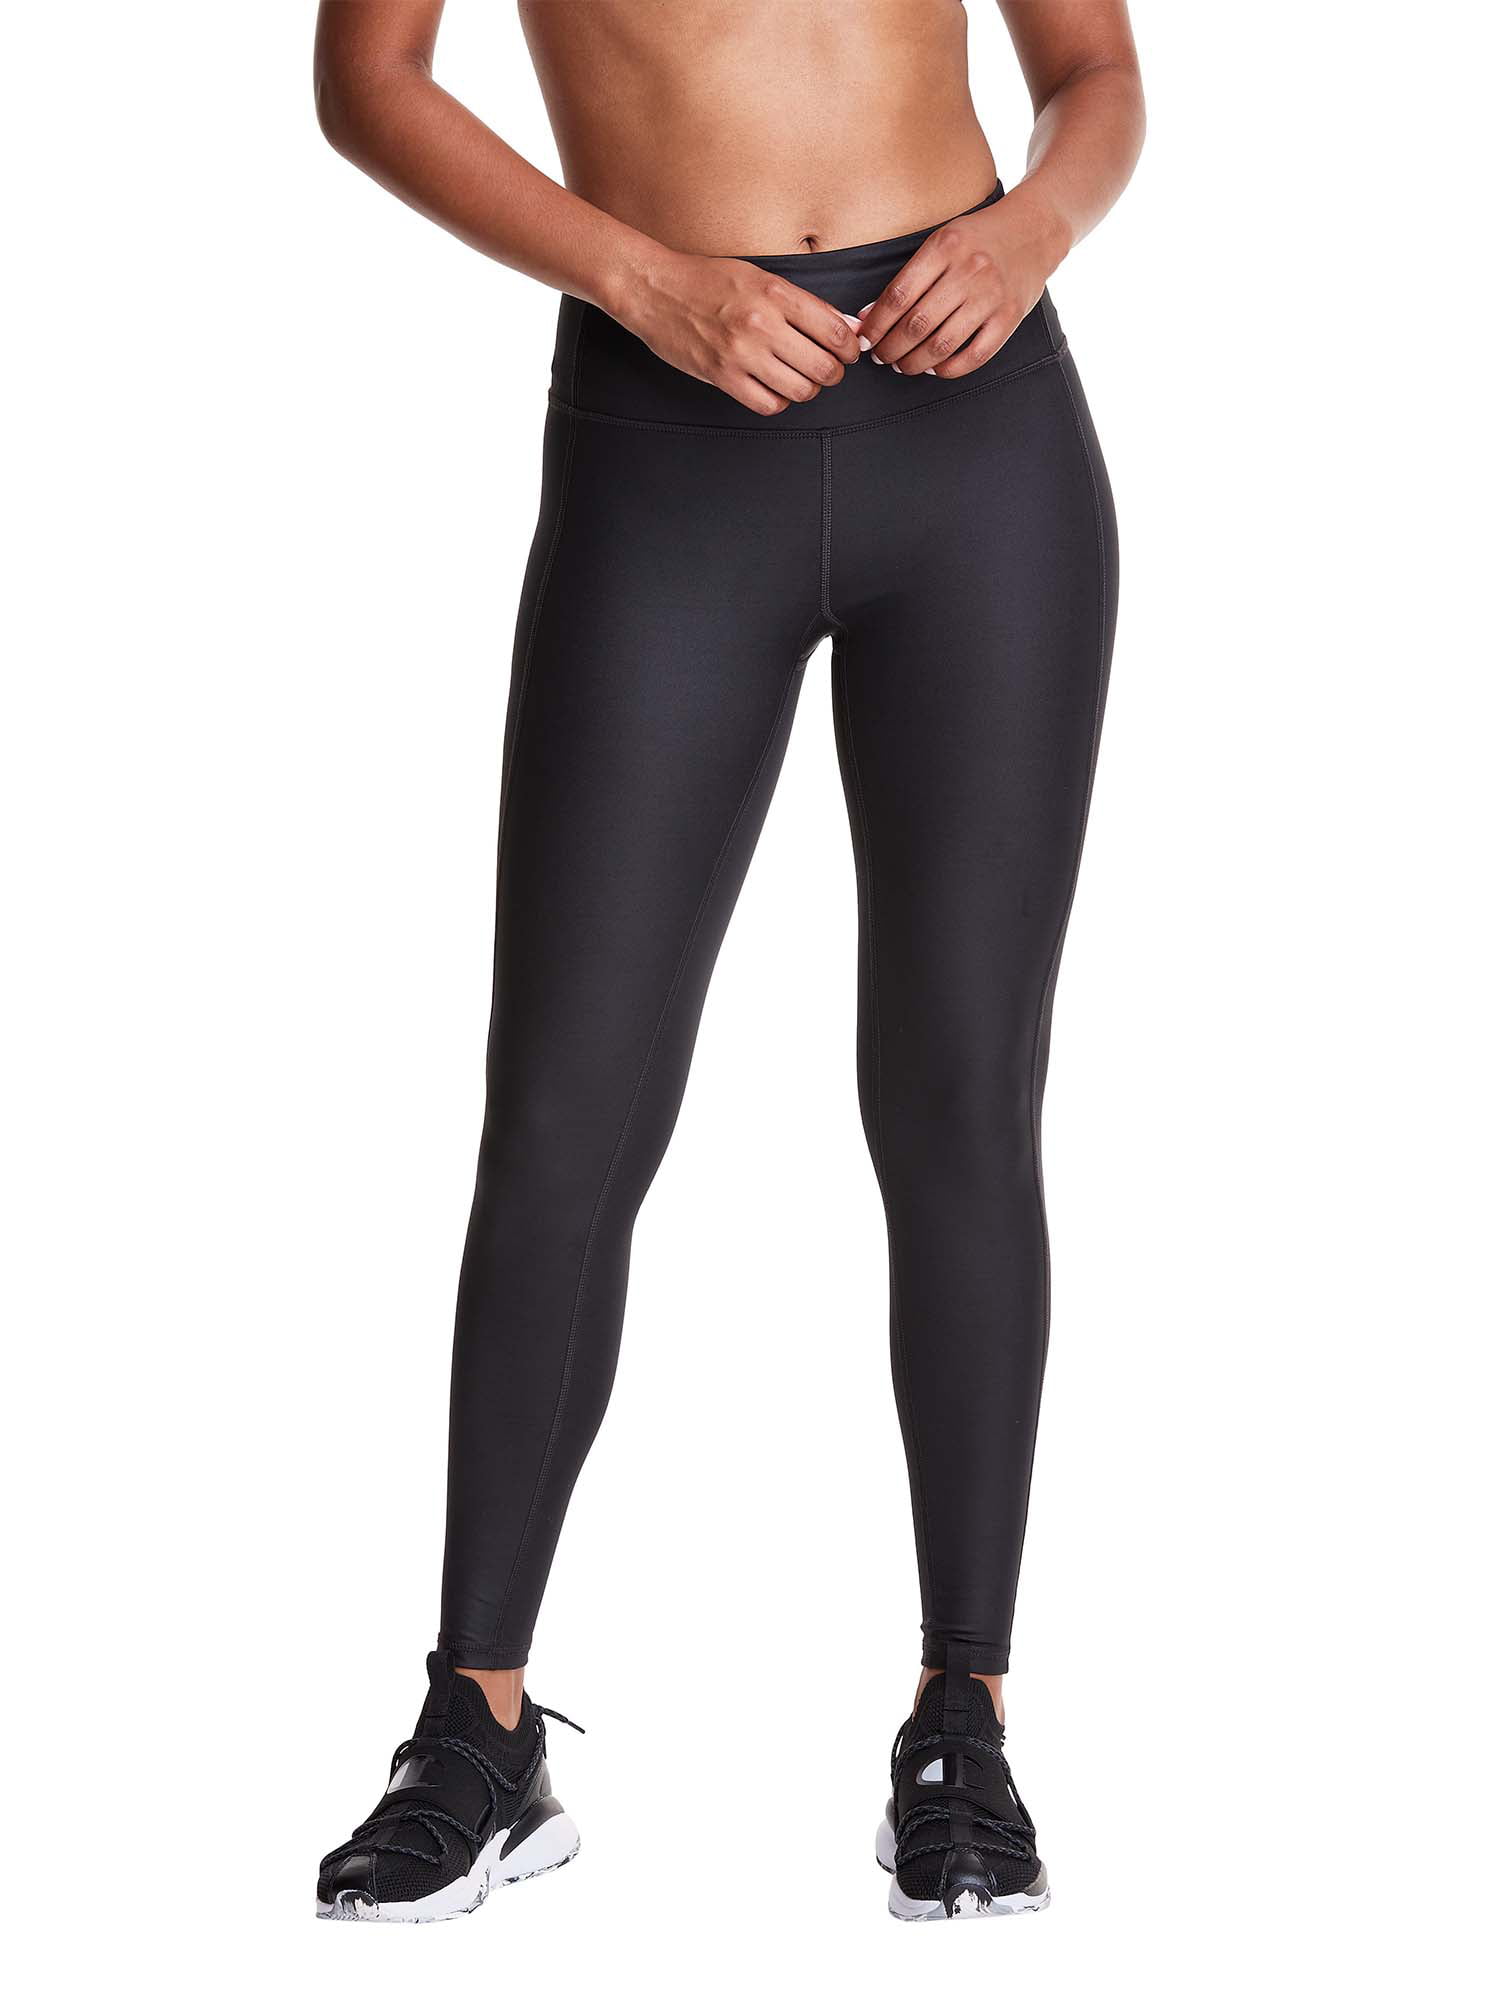 Skins Womens DNAmic Compression 3/4 Tights Bottoms Pants Trousers Black Sports 